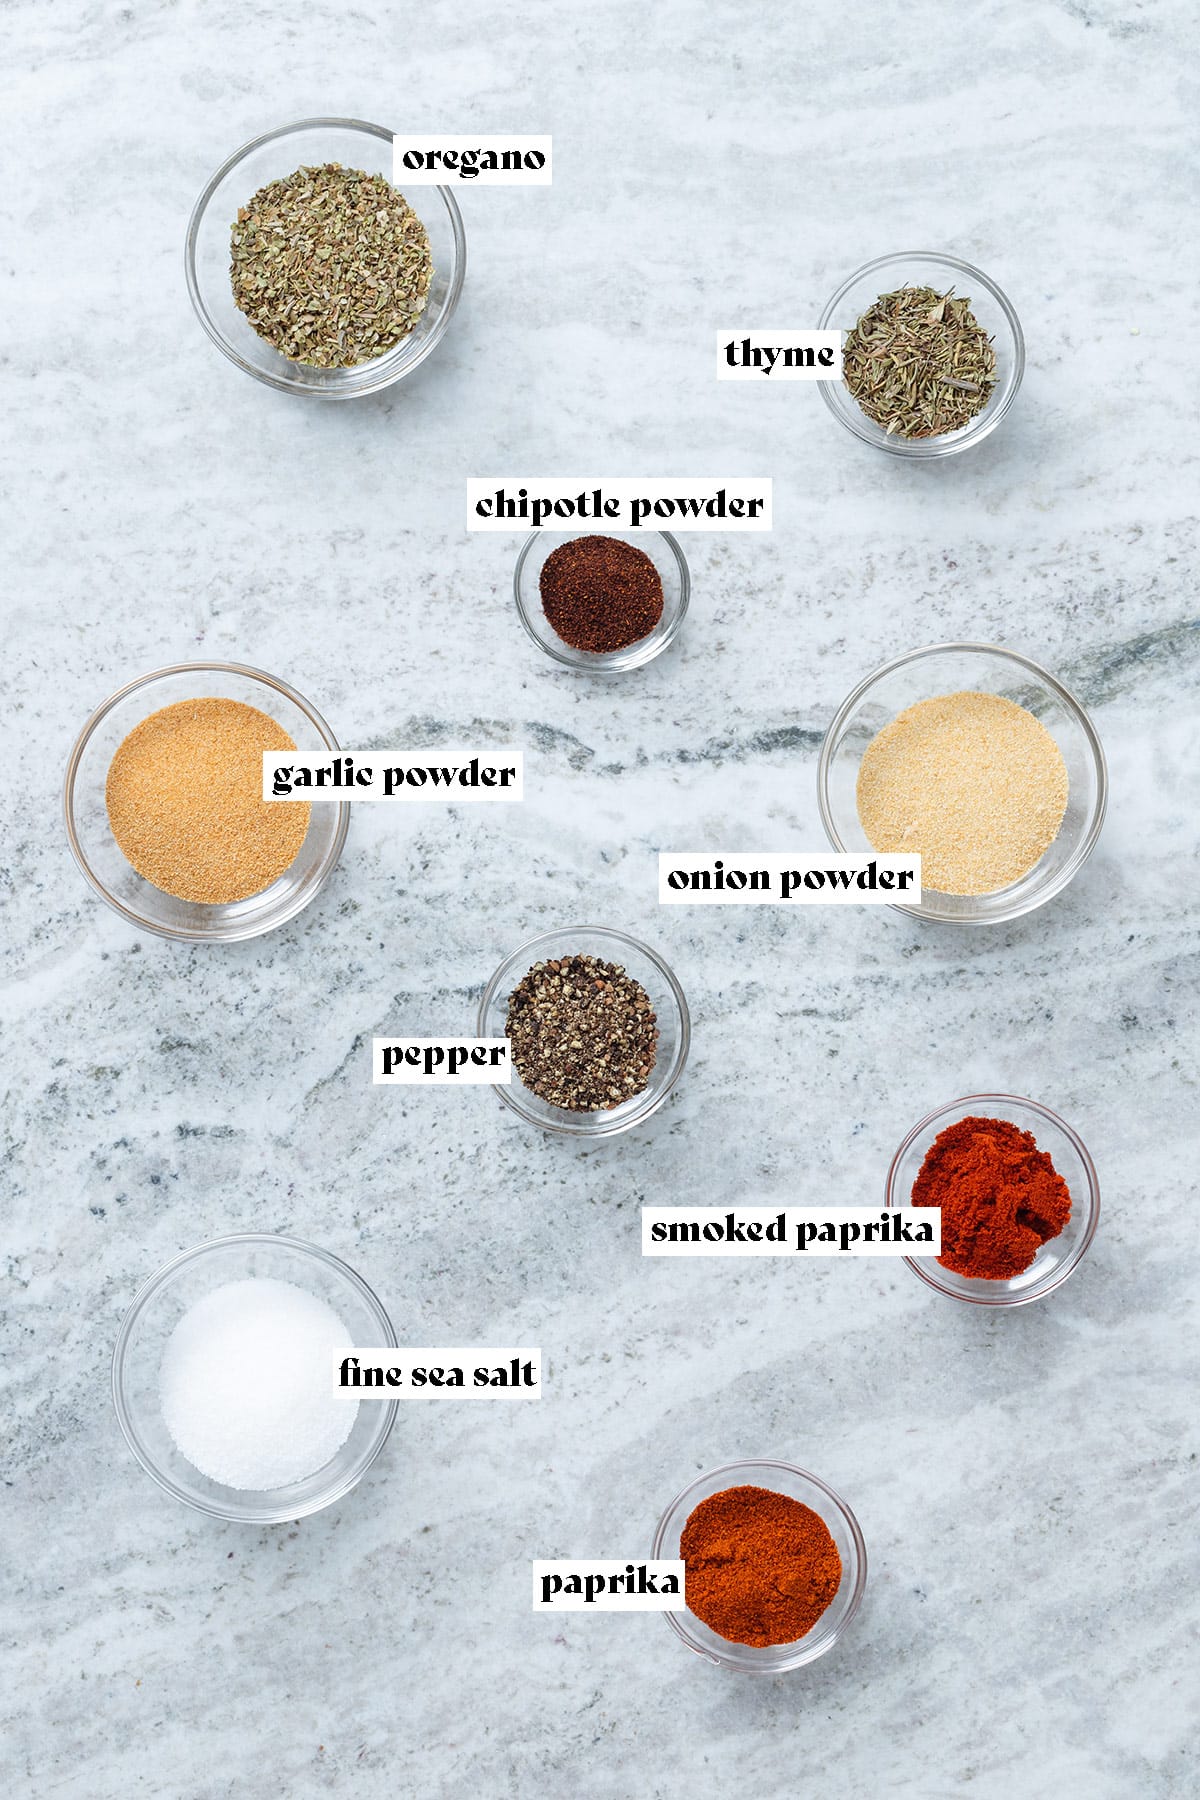 Various spices measured and laid out on a grey stone background with text overlay.